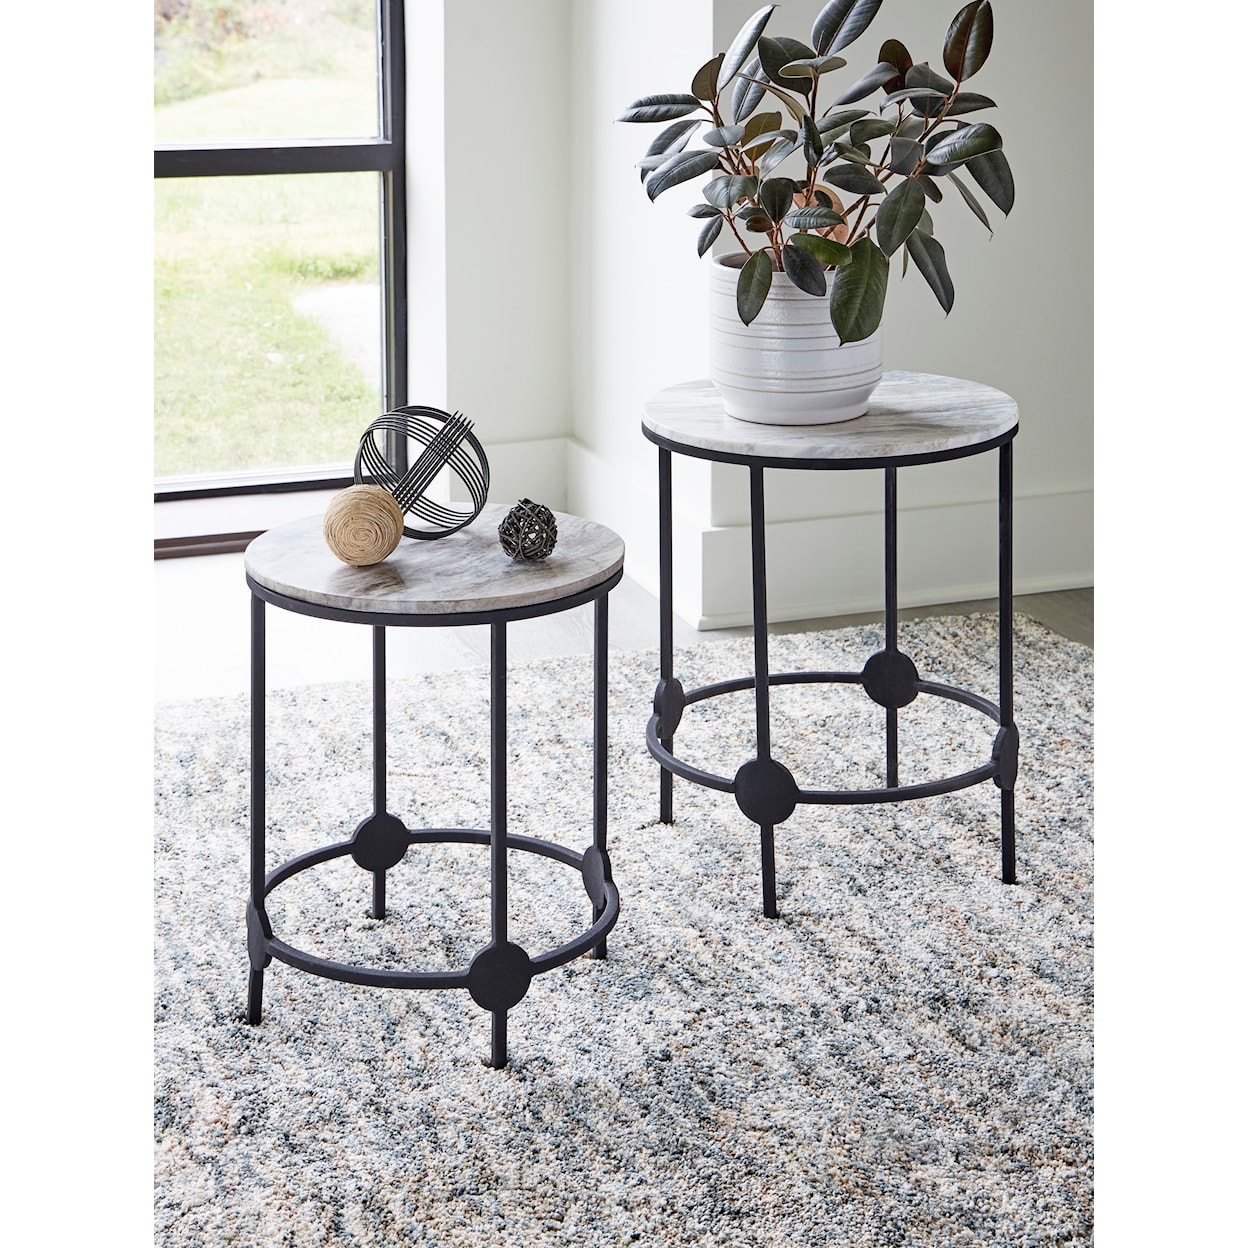 Signature Design by Ashley Beashaw Accent Table (Set of 2)